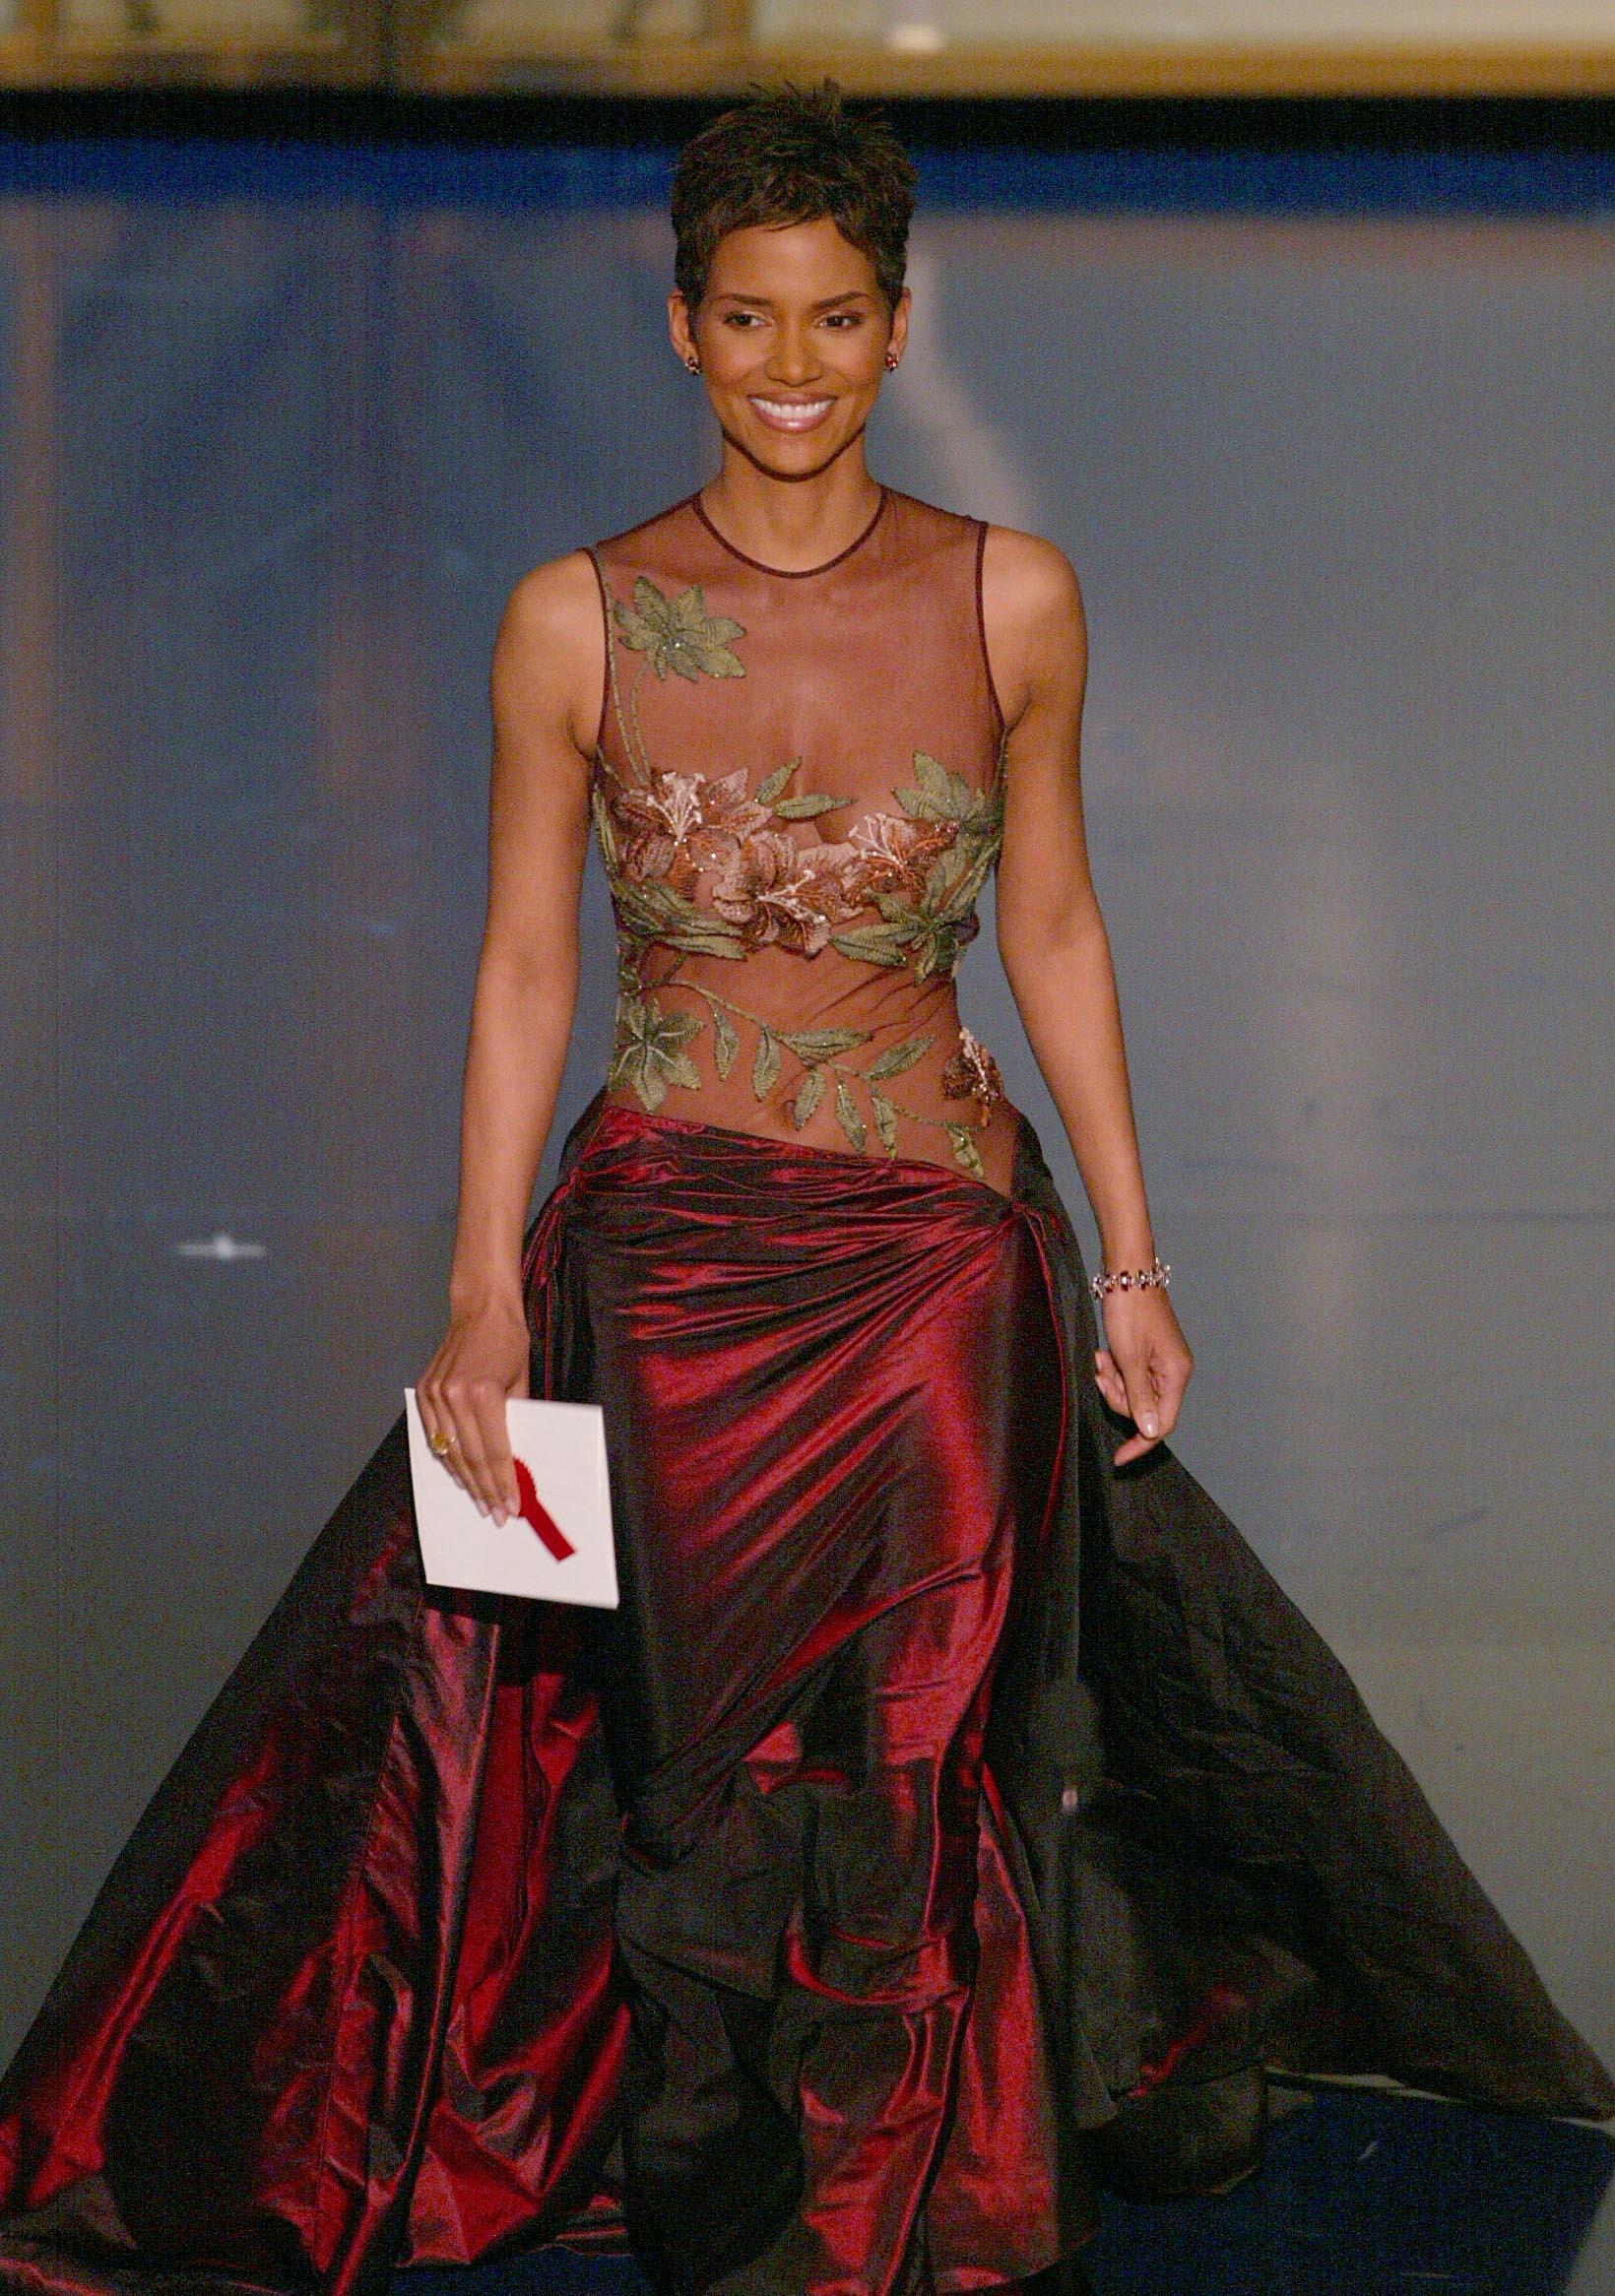 Halle Berry in 2002 wearing an Elie Saab gown